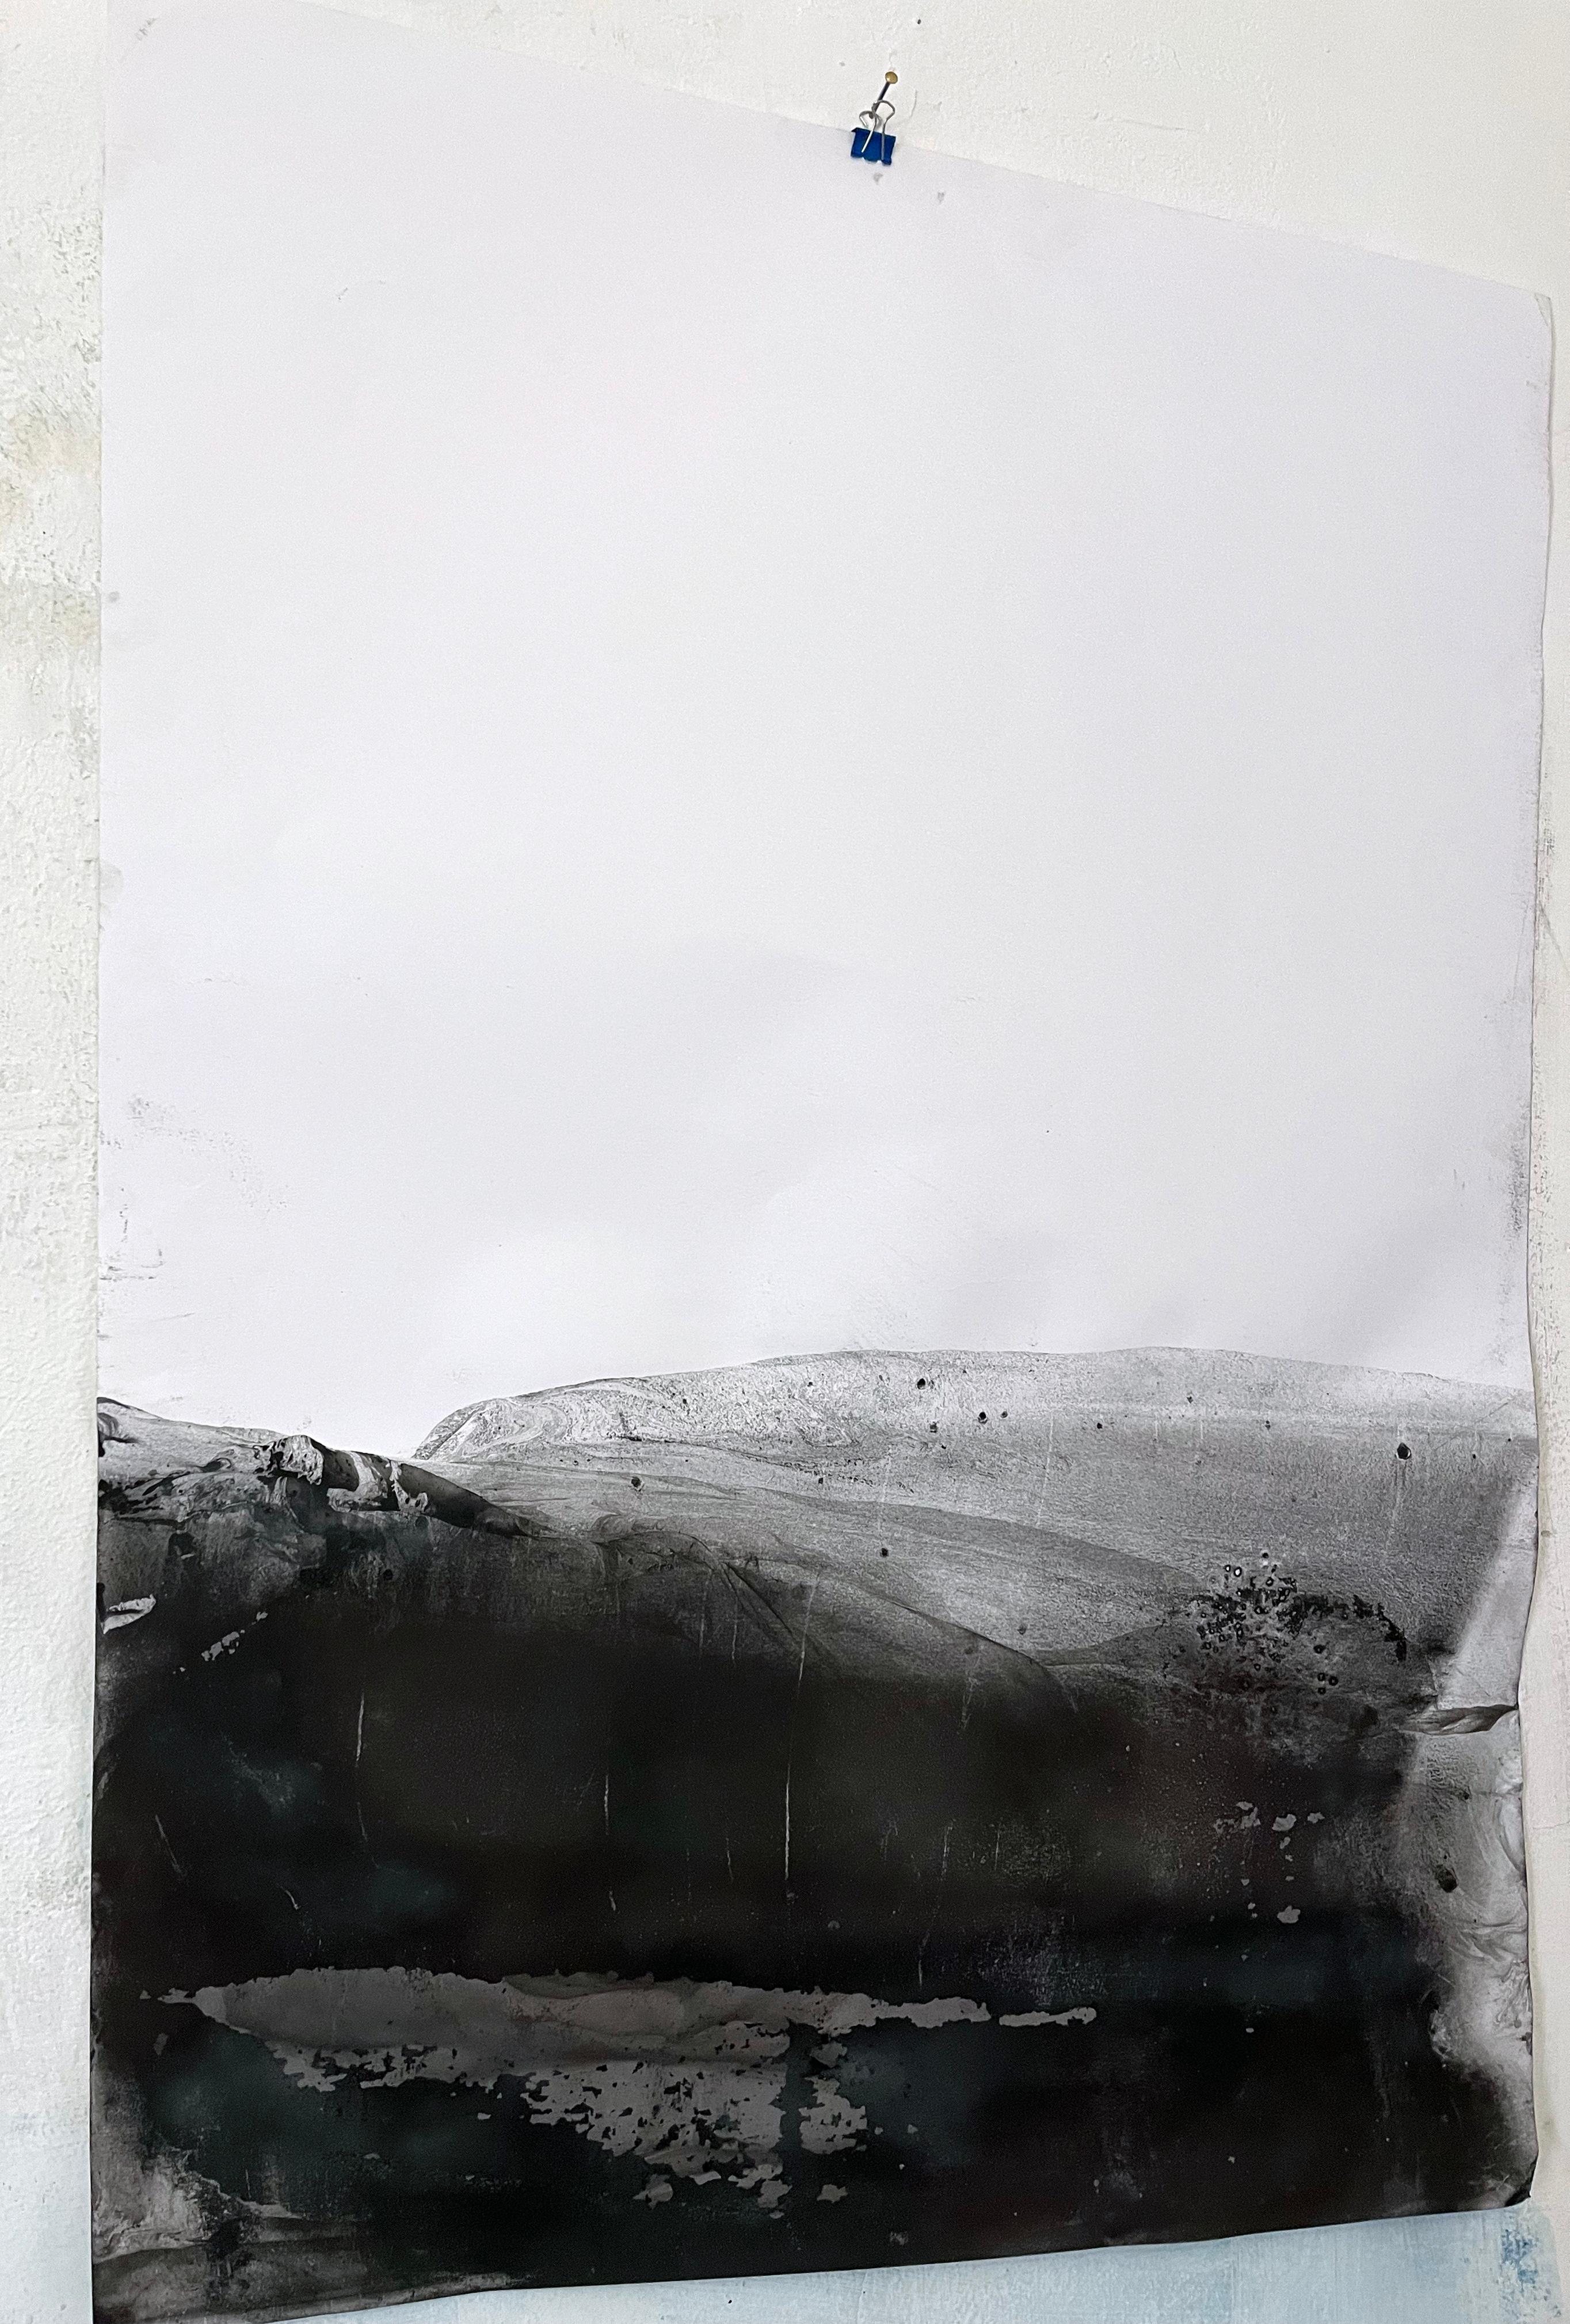 Landscape Black and White - Original Drawing -Large Size made in Italy - Contemporary Art by Marilina Marchica